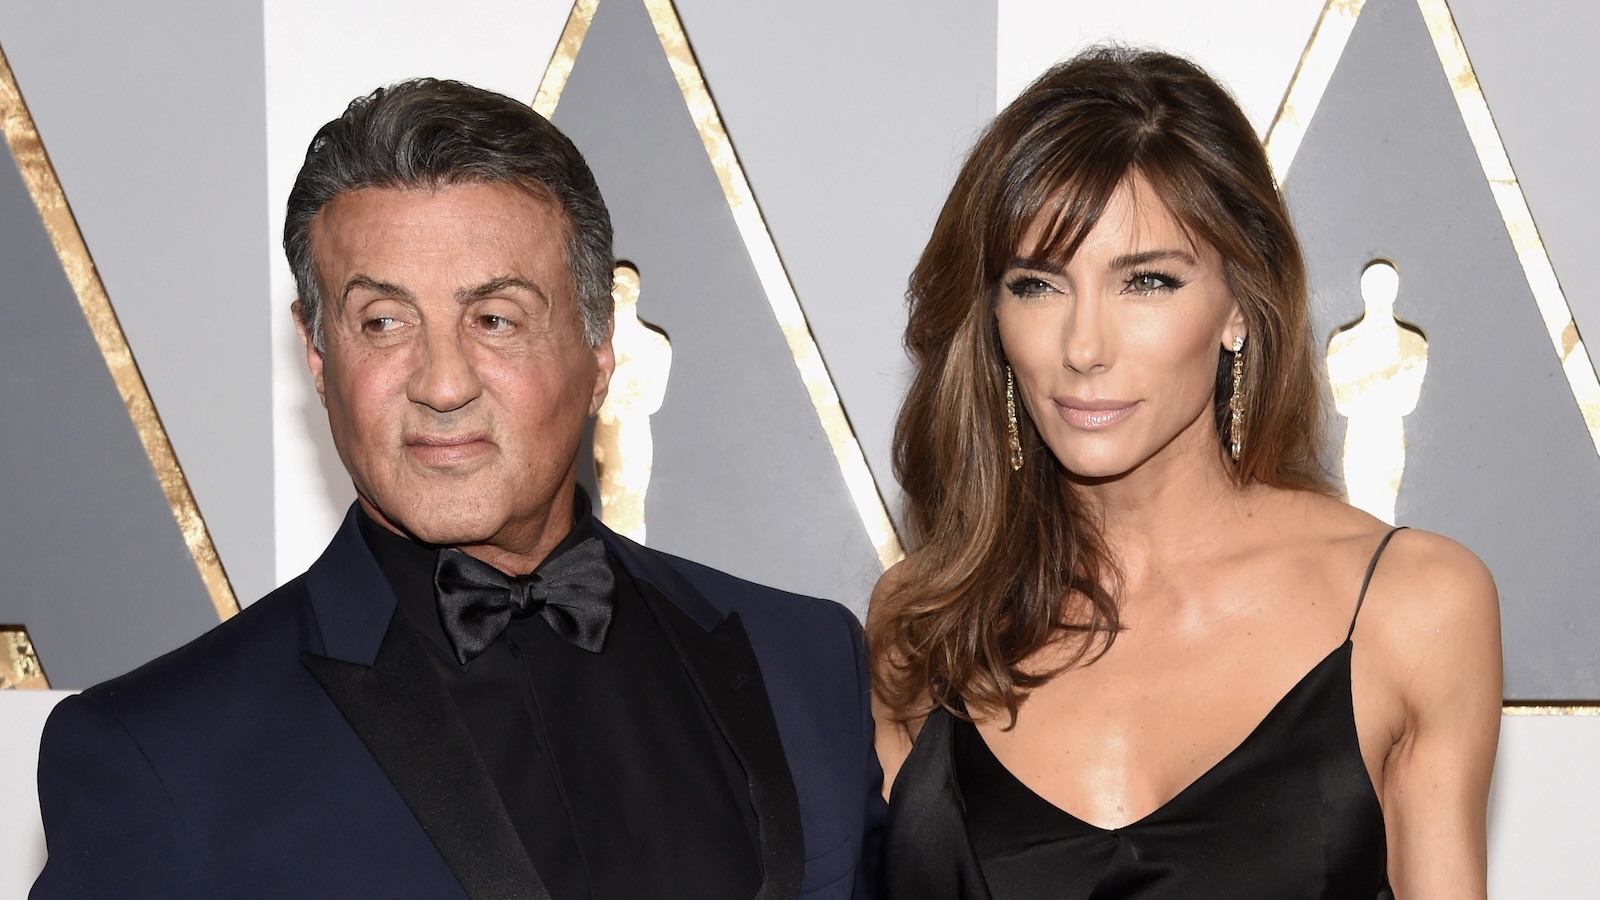 Sylvester Stallone and Jennifer Flavin attend the 88th Annual Academy Awards at the Hollywood & Highland Center on February 28, 2016 in Hollywood, California.